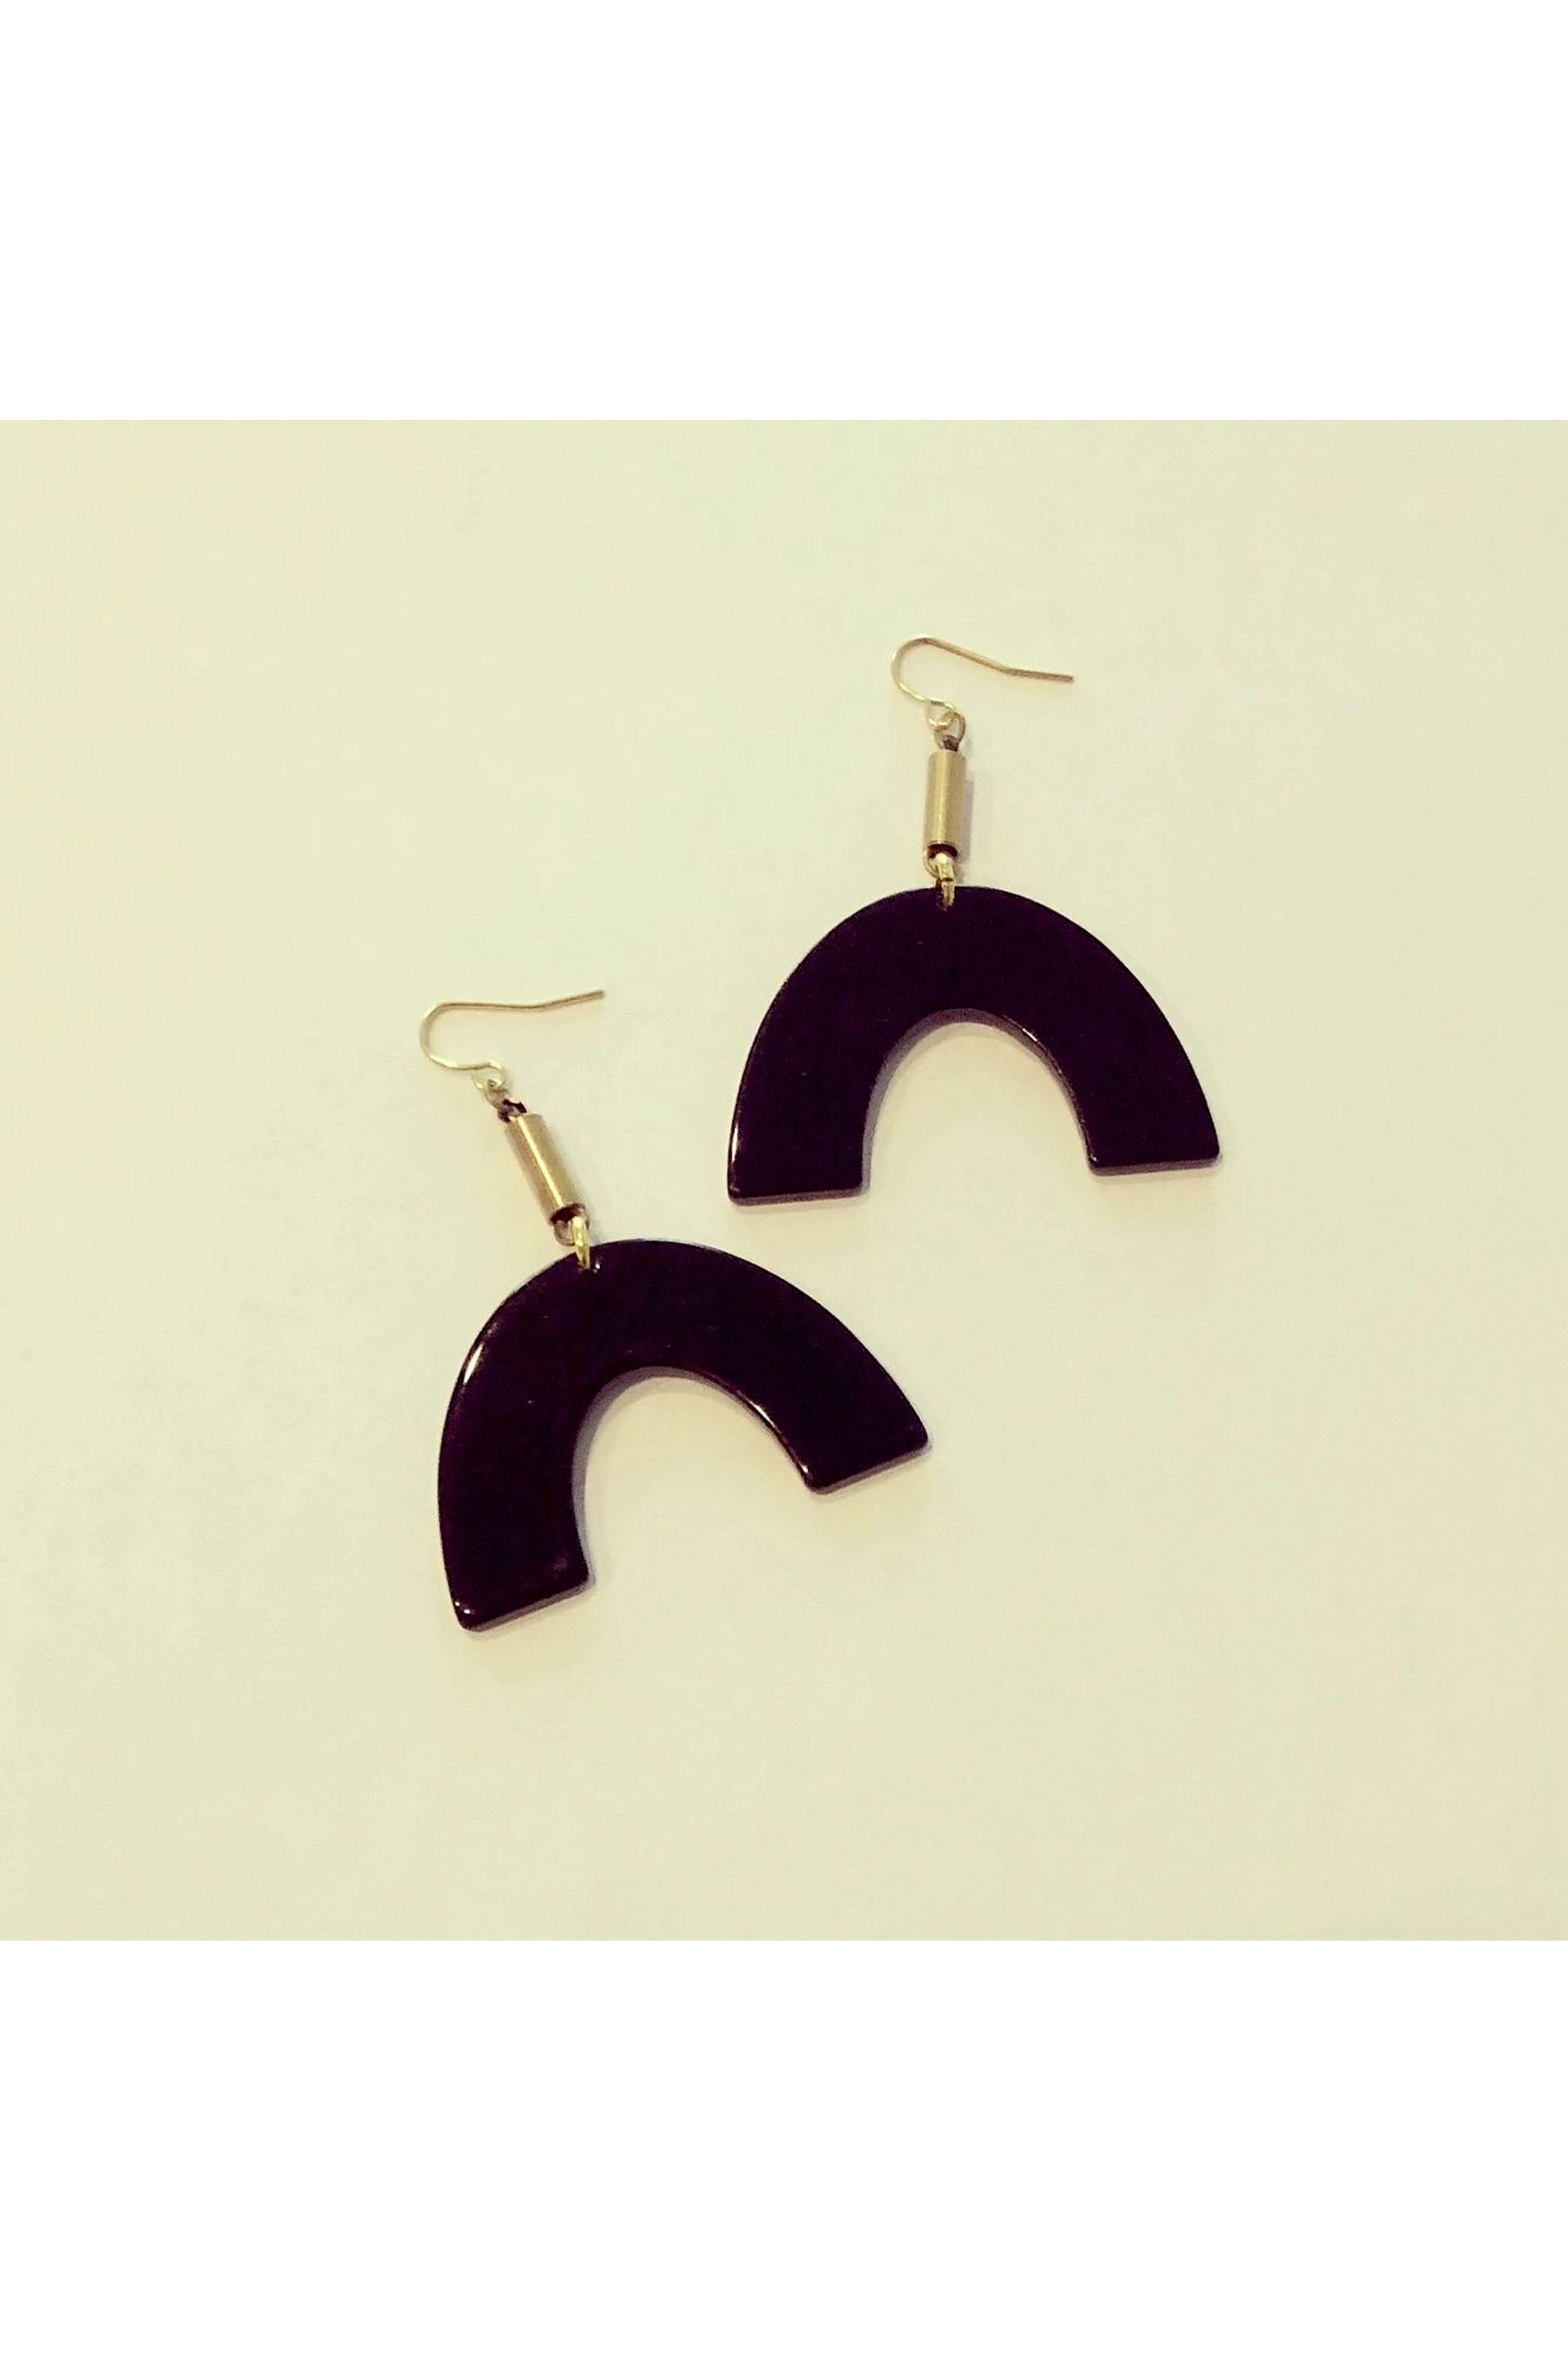 Vuttue dangle earring by Darlings of Denmark; black acrylic arch hanging off raw brass tubes; flat lay